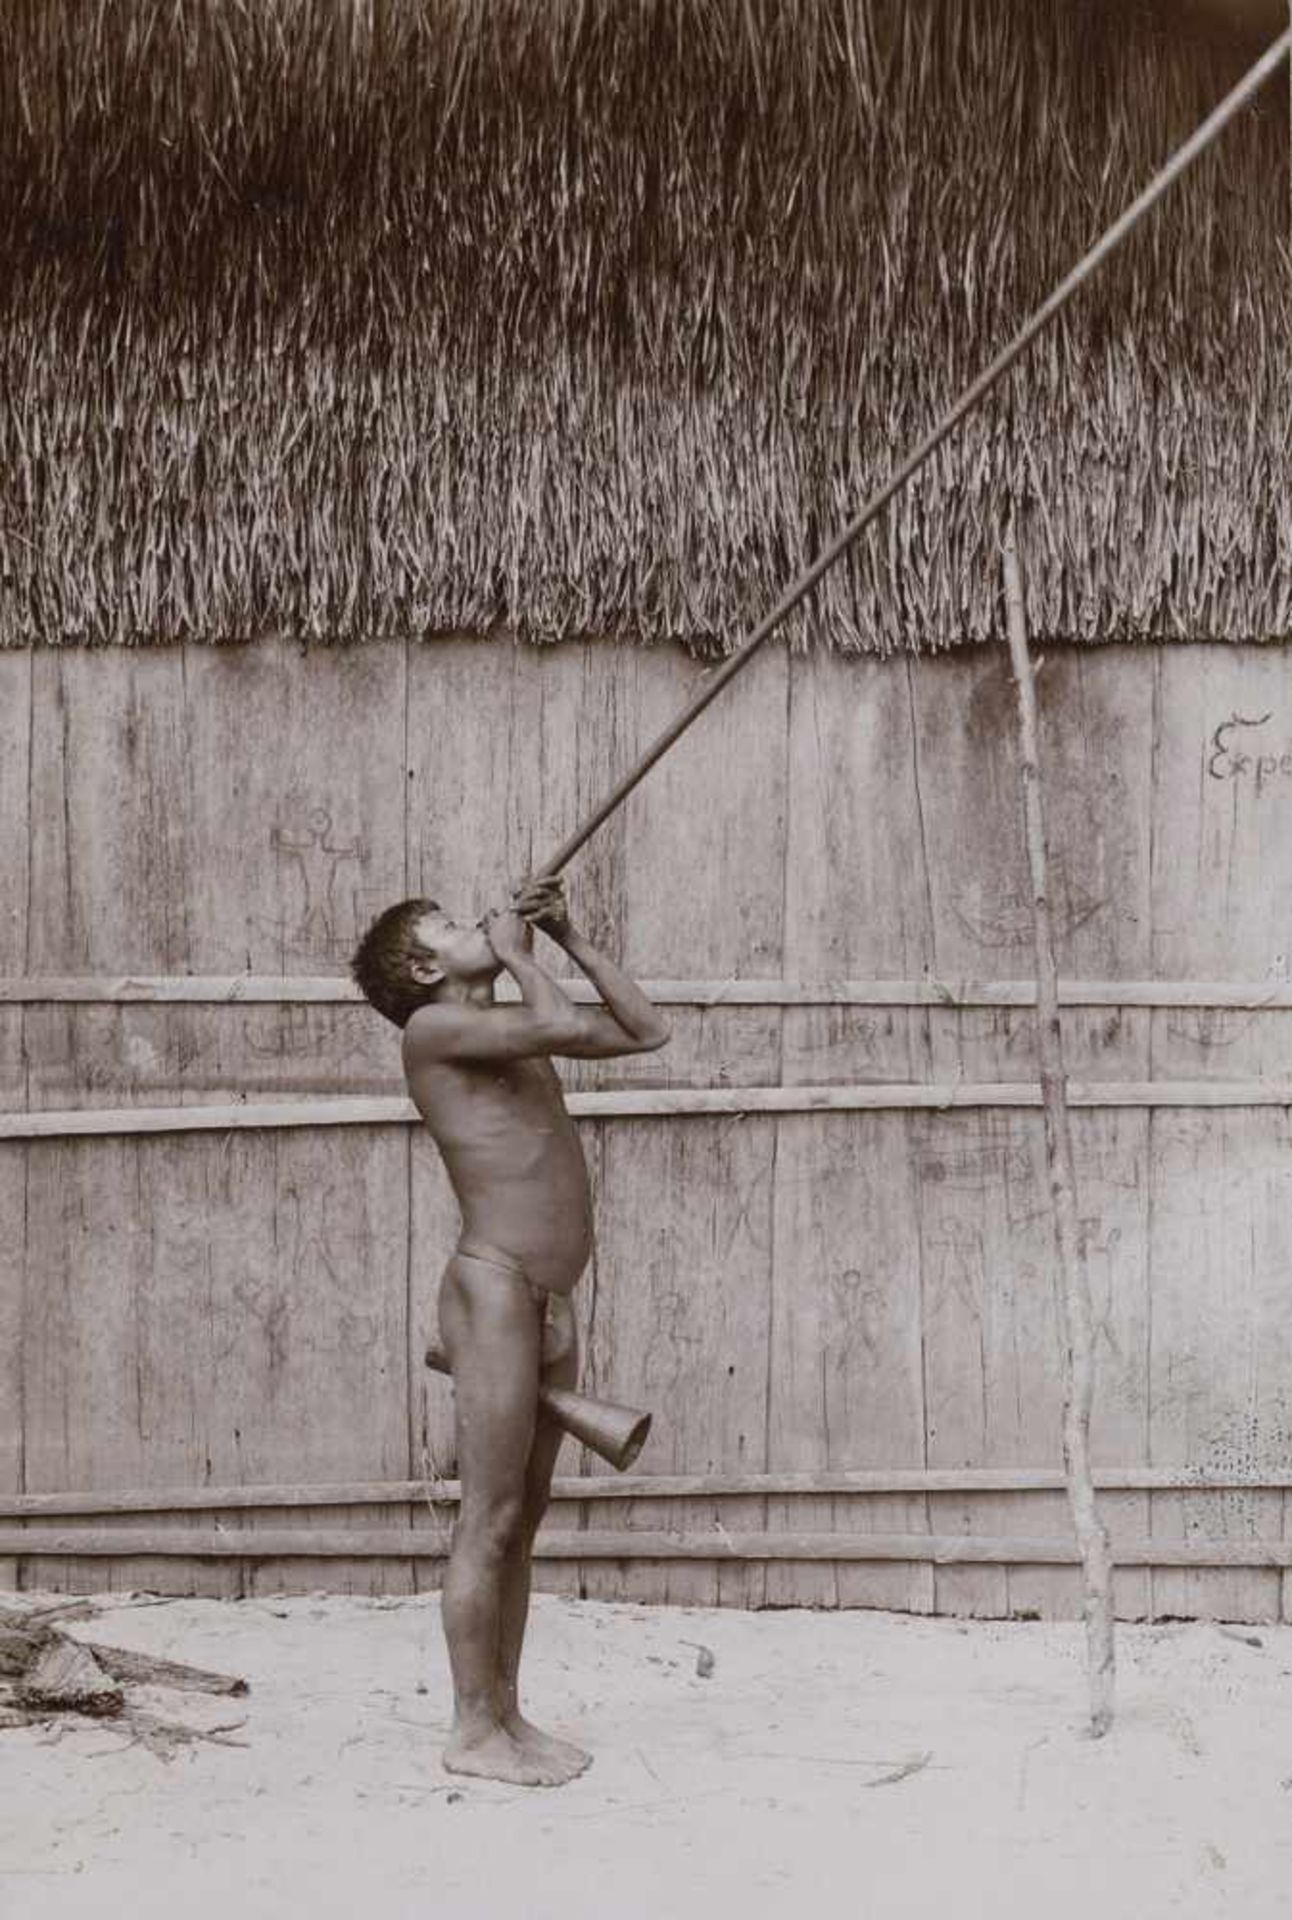 Amazonia / Koch-Grünberg Expedition: Landscapes, portraits, hunting and village scenes of the Amazon